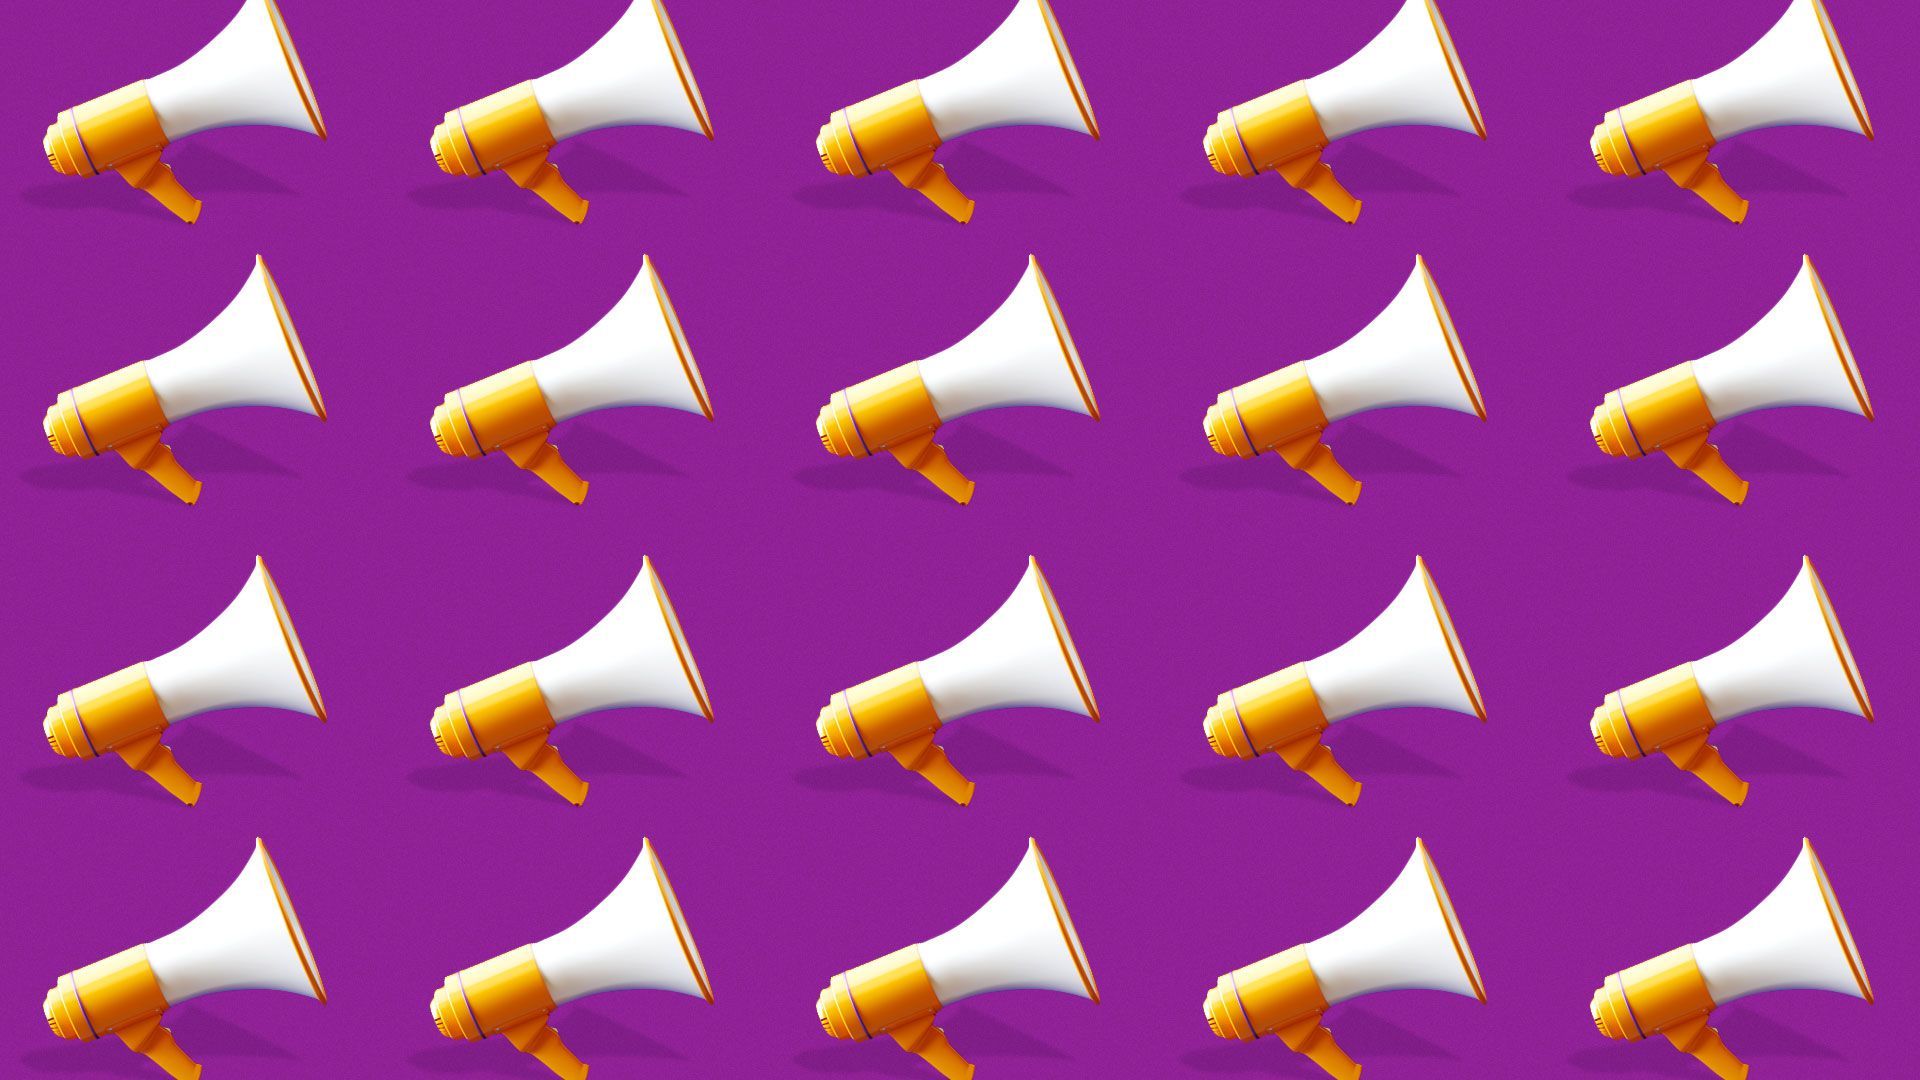 Illustration of a repeating megaphone pattern.